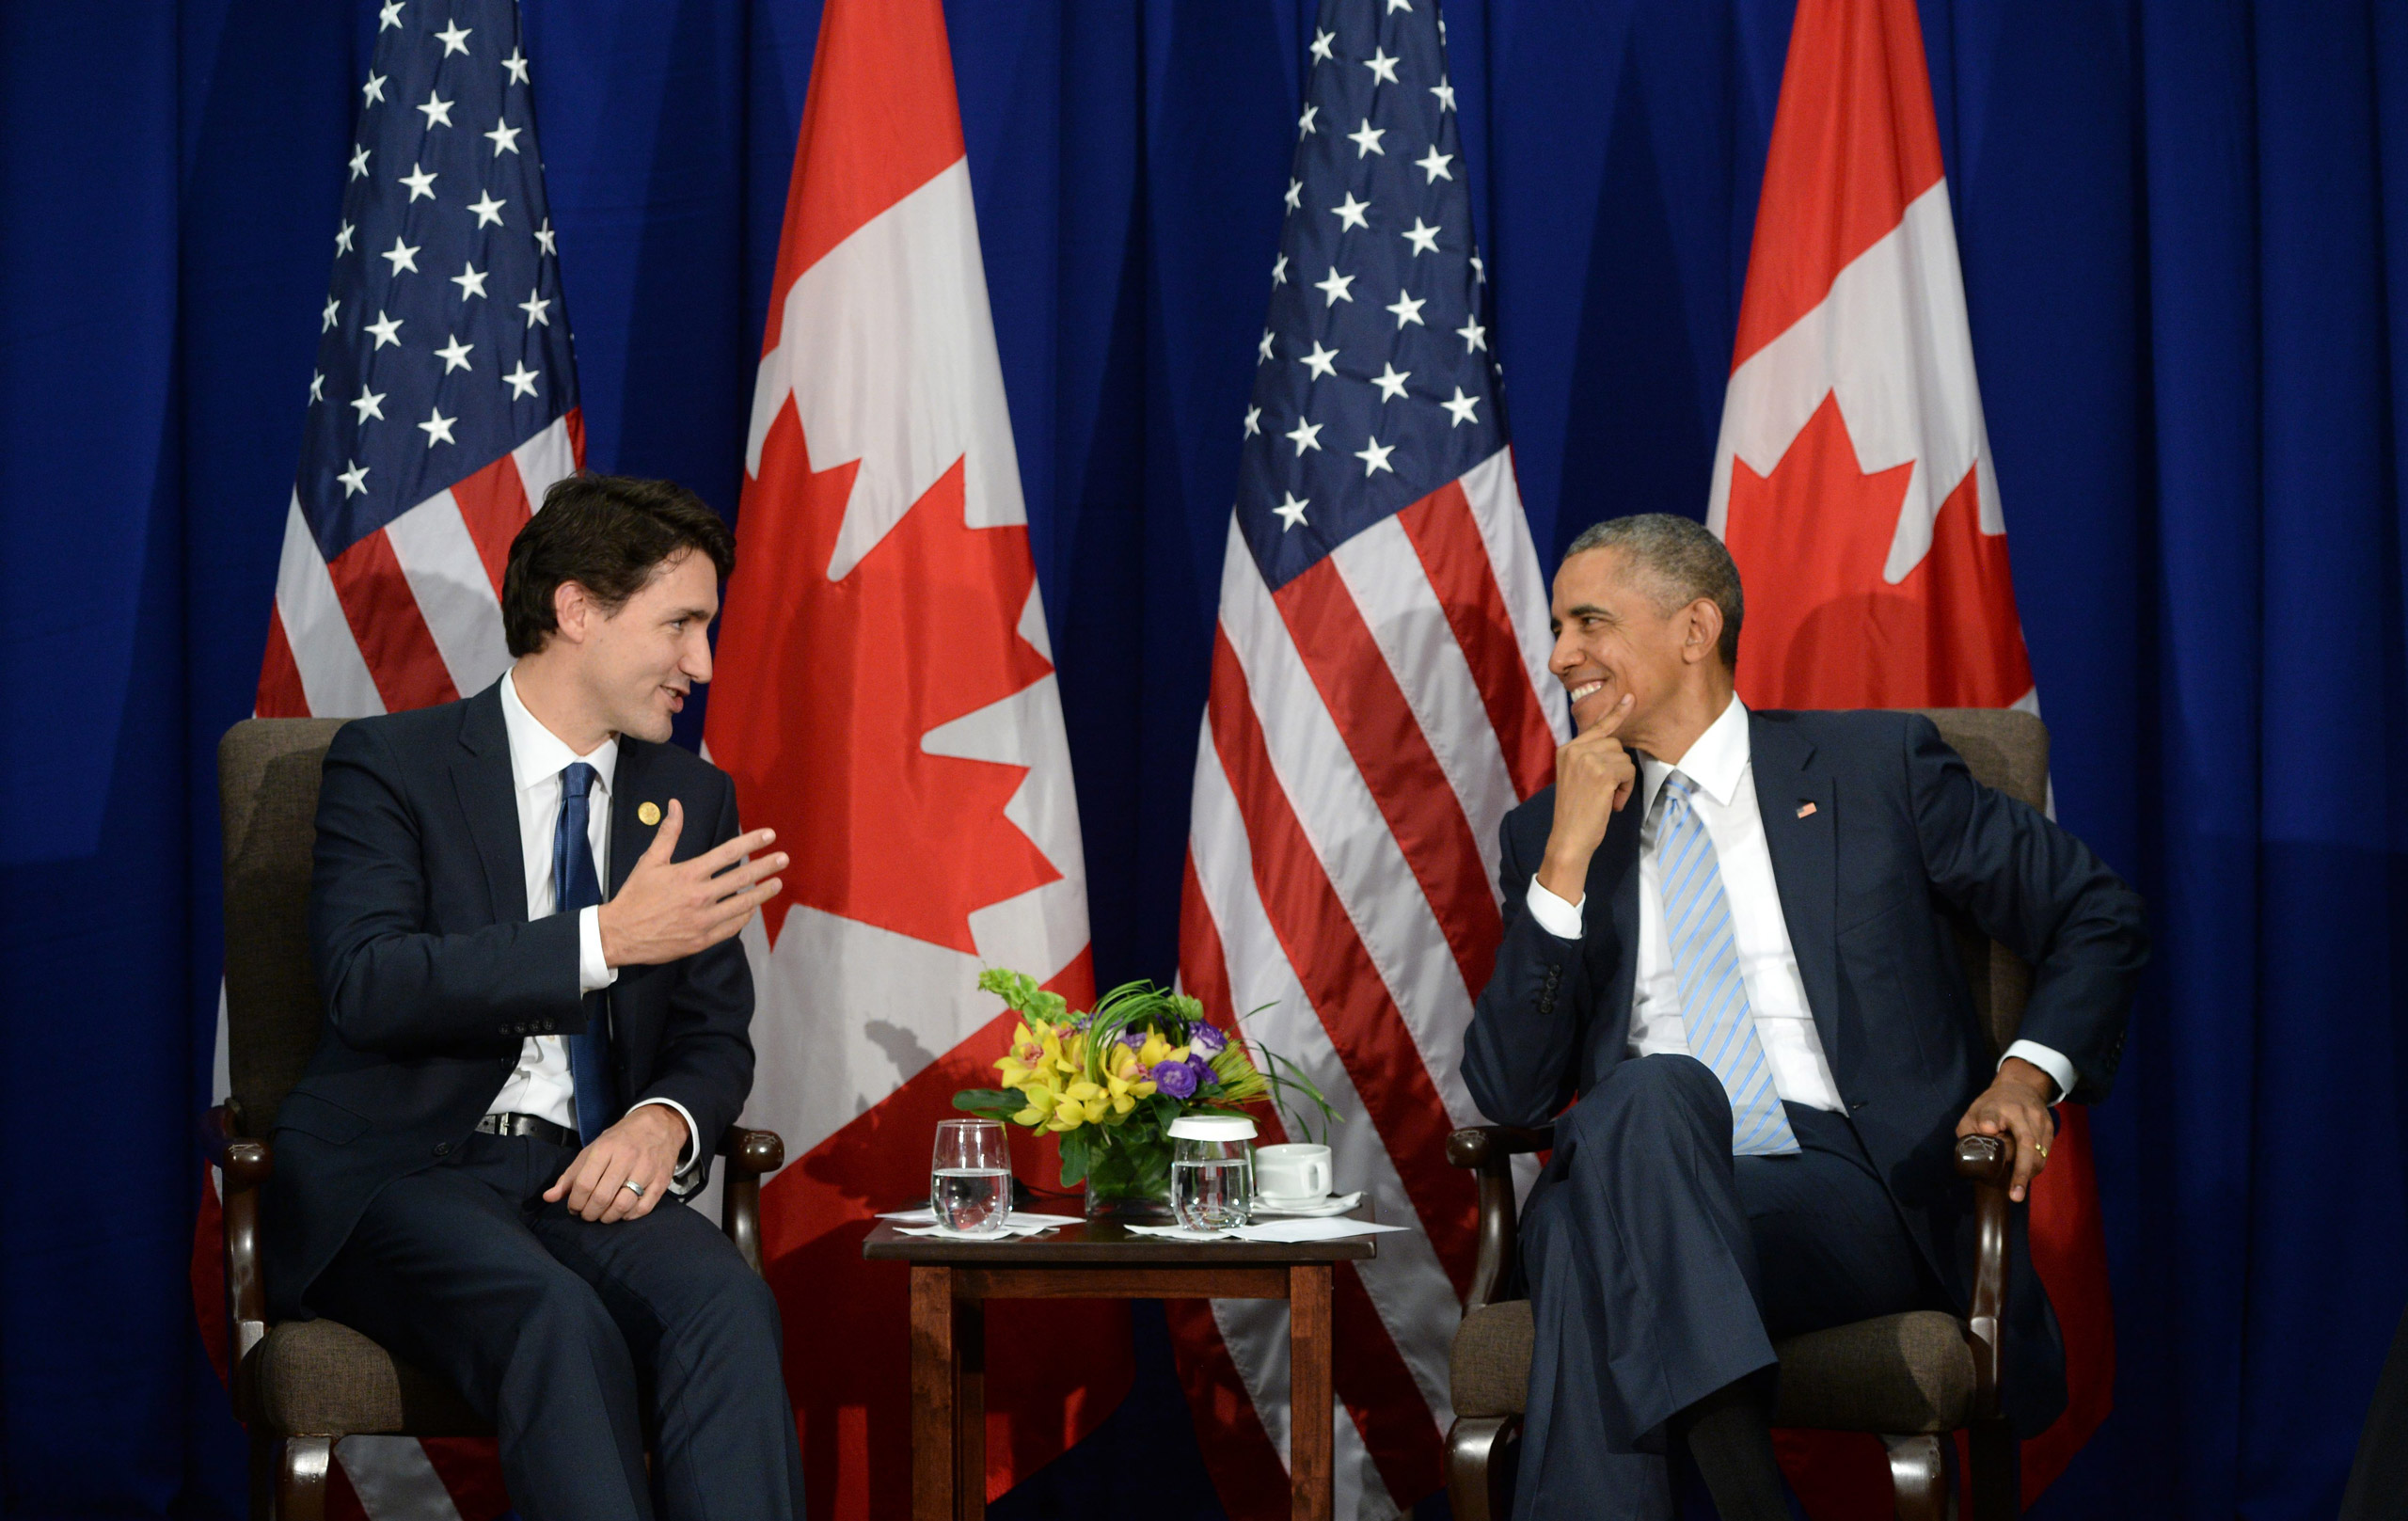 Canada's Prime Minister Justin Trudeau, left, takes part in a bilateral meeting with U.S. President Barack Obama at the APEC Summit in Manila on Nov. 19, 2015. (Sean Kilpatrick—The Canadian Press/AP)